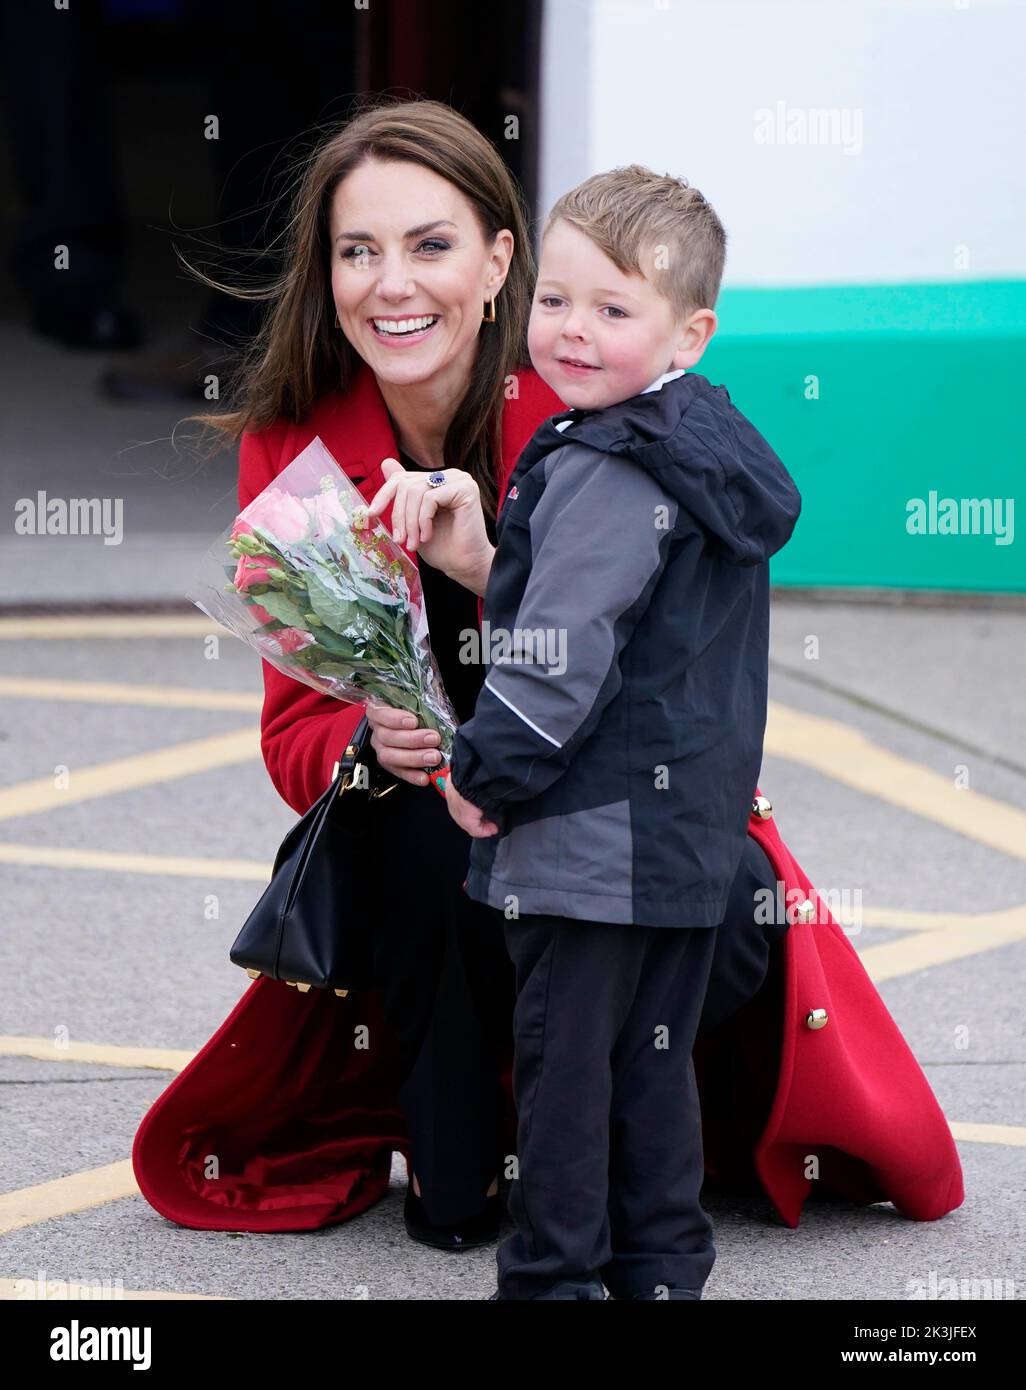 RETRANSMITTING ADDING NAME The Princess of Wales receives a posy of flowers from four-year-old Theo Crompton as she arrives for a visit to the RNLI Holyhead Lifeboat Station, in Holyhead, Wales, where with the Prince of Wales they are meeting crew, volunteers and some of those who have been supported by their local unit. Holyhead is one of the three oldest lifeboat stations on the Welsh coast and has a remarkable history of bravery, having received 70 awards for gallantry. Picture date: Tuesday September 27, 2022. Stock Photo